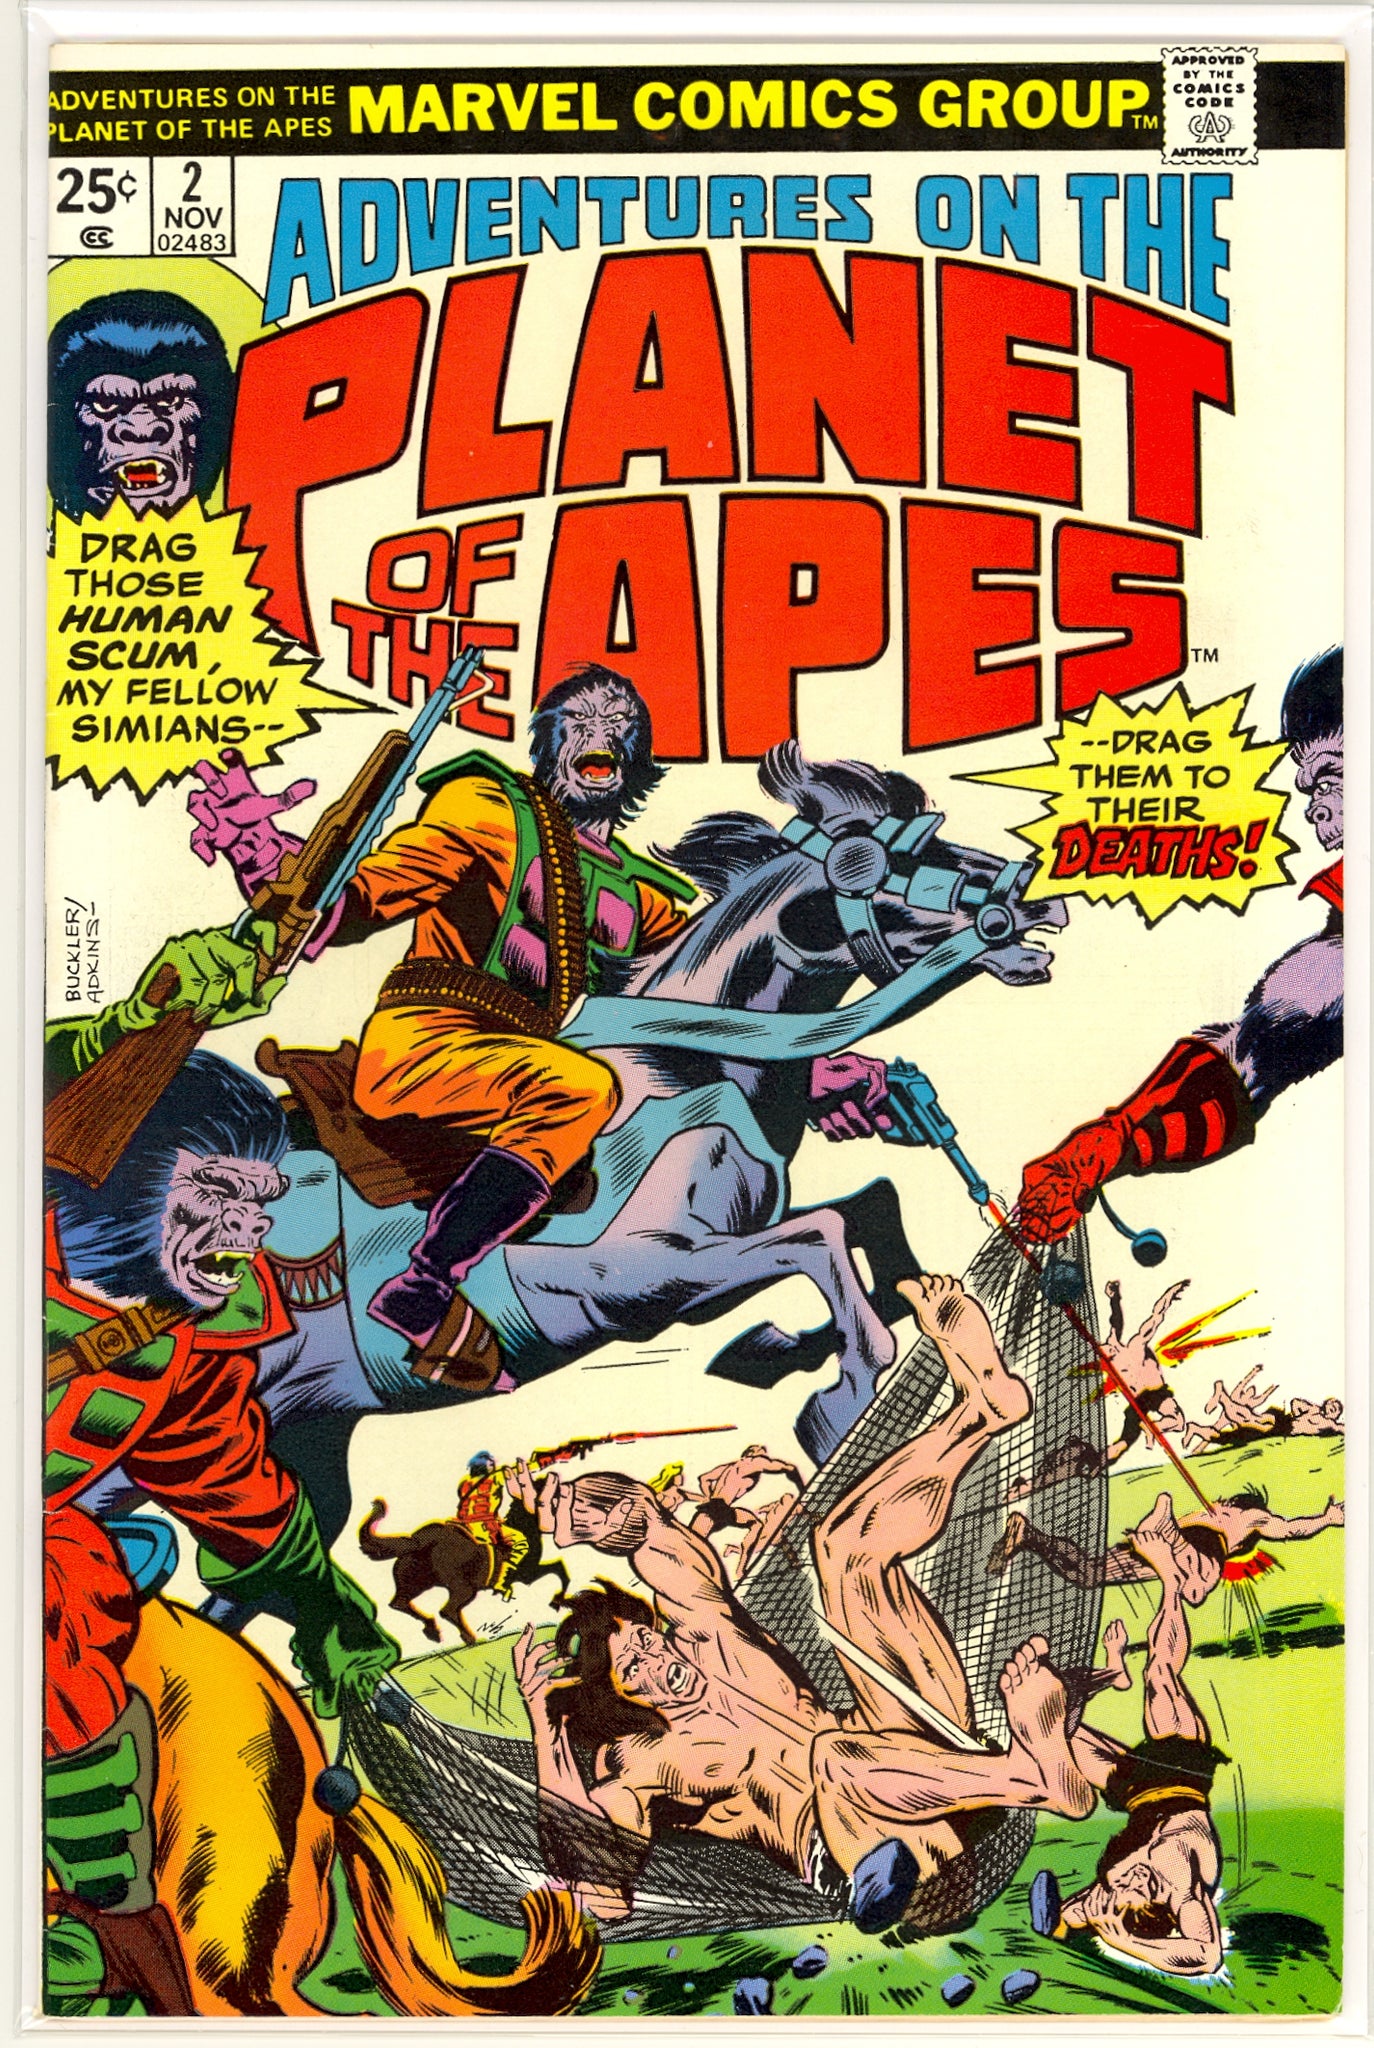 Adventures on the Planet of the Apes #2 (1975)